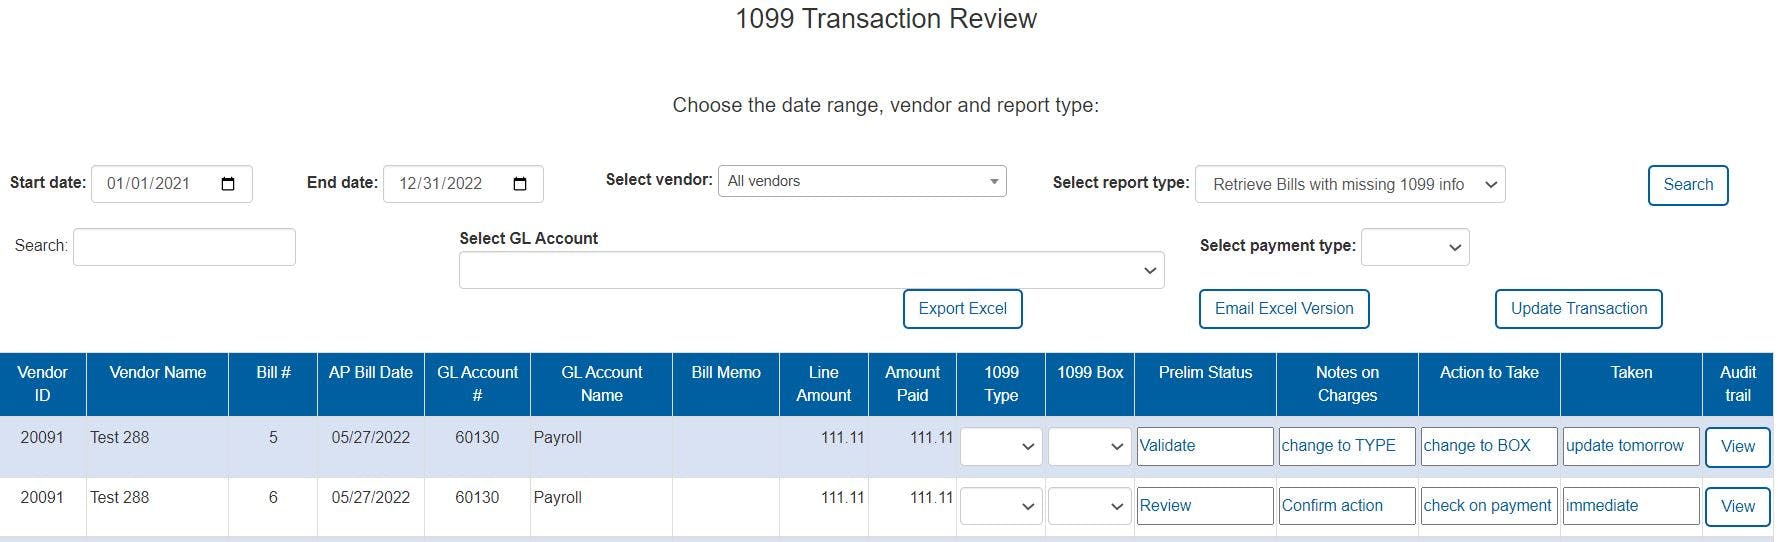 1099 transaction review